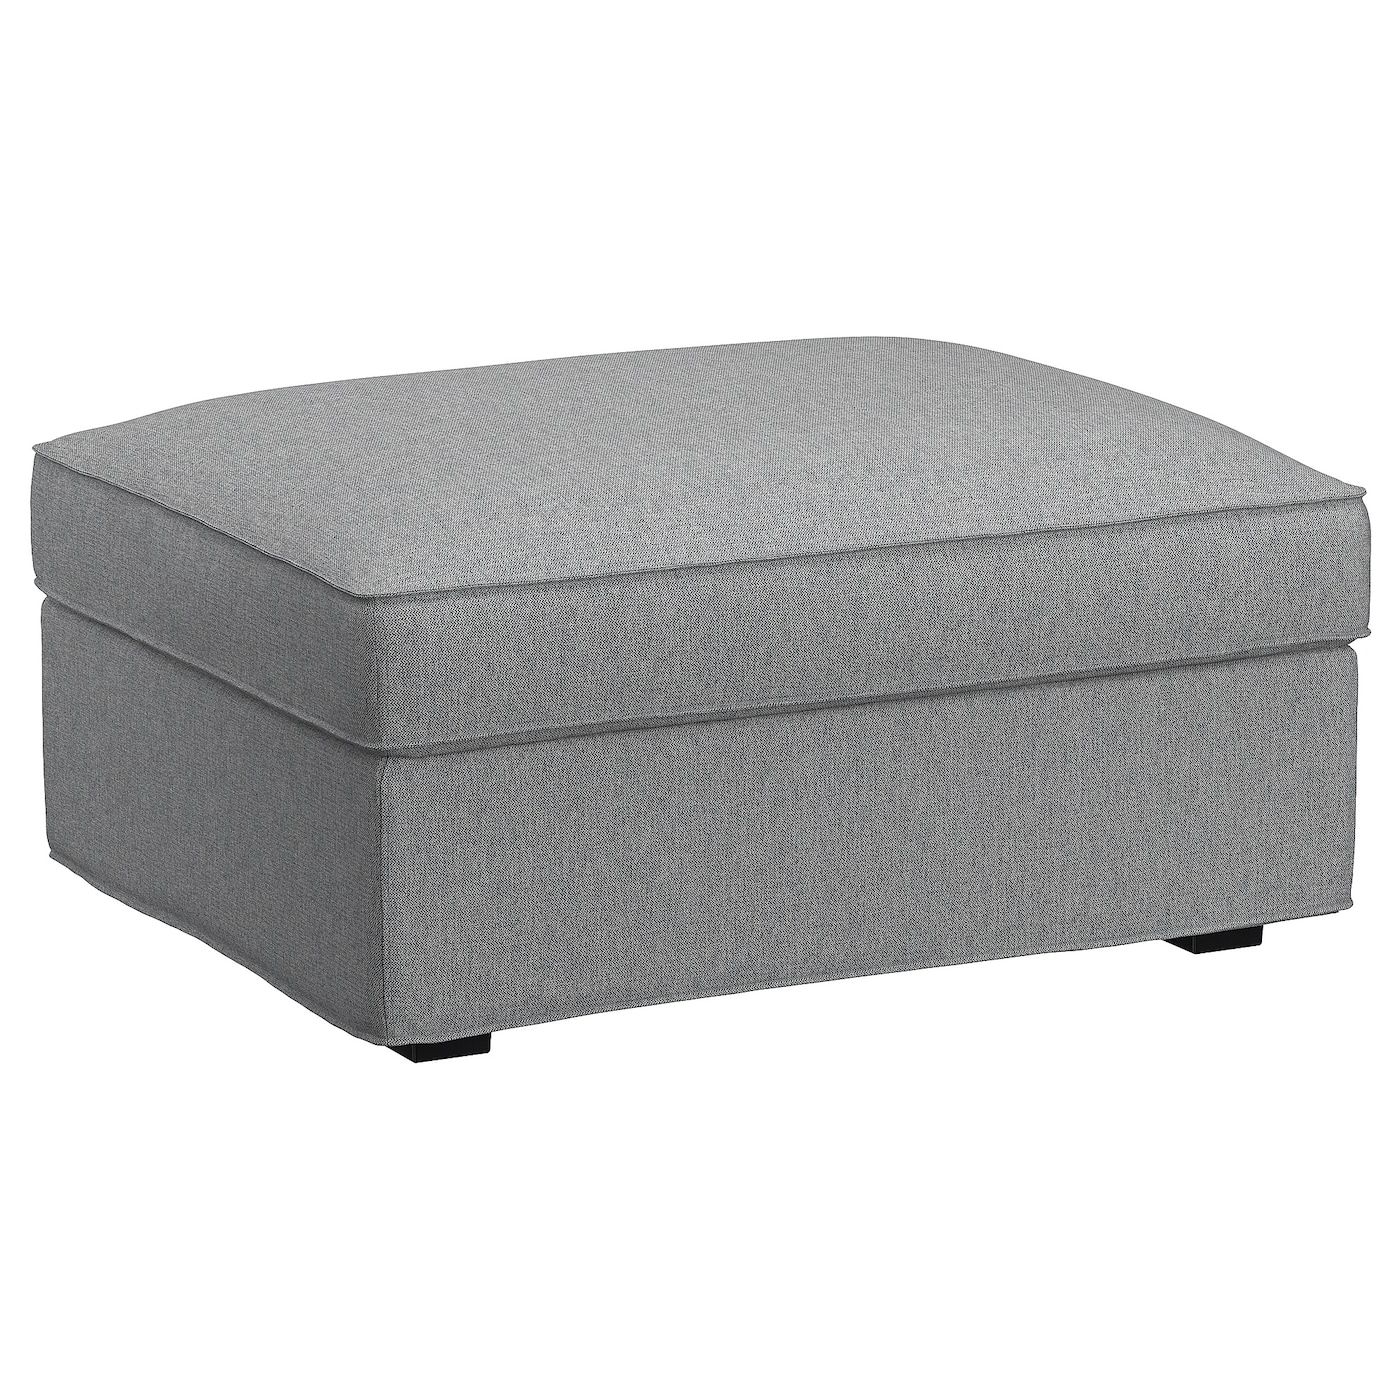 Kivik Ottoman With Storage, Tibbleby Beige/gray – Ikea Pertaining To Most Current Gray Ottomans (View 1 of 15)